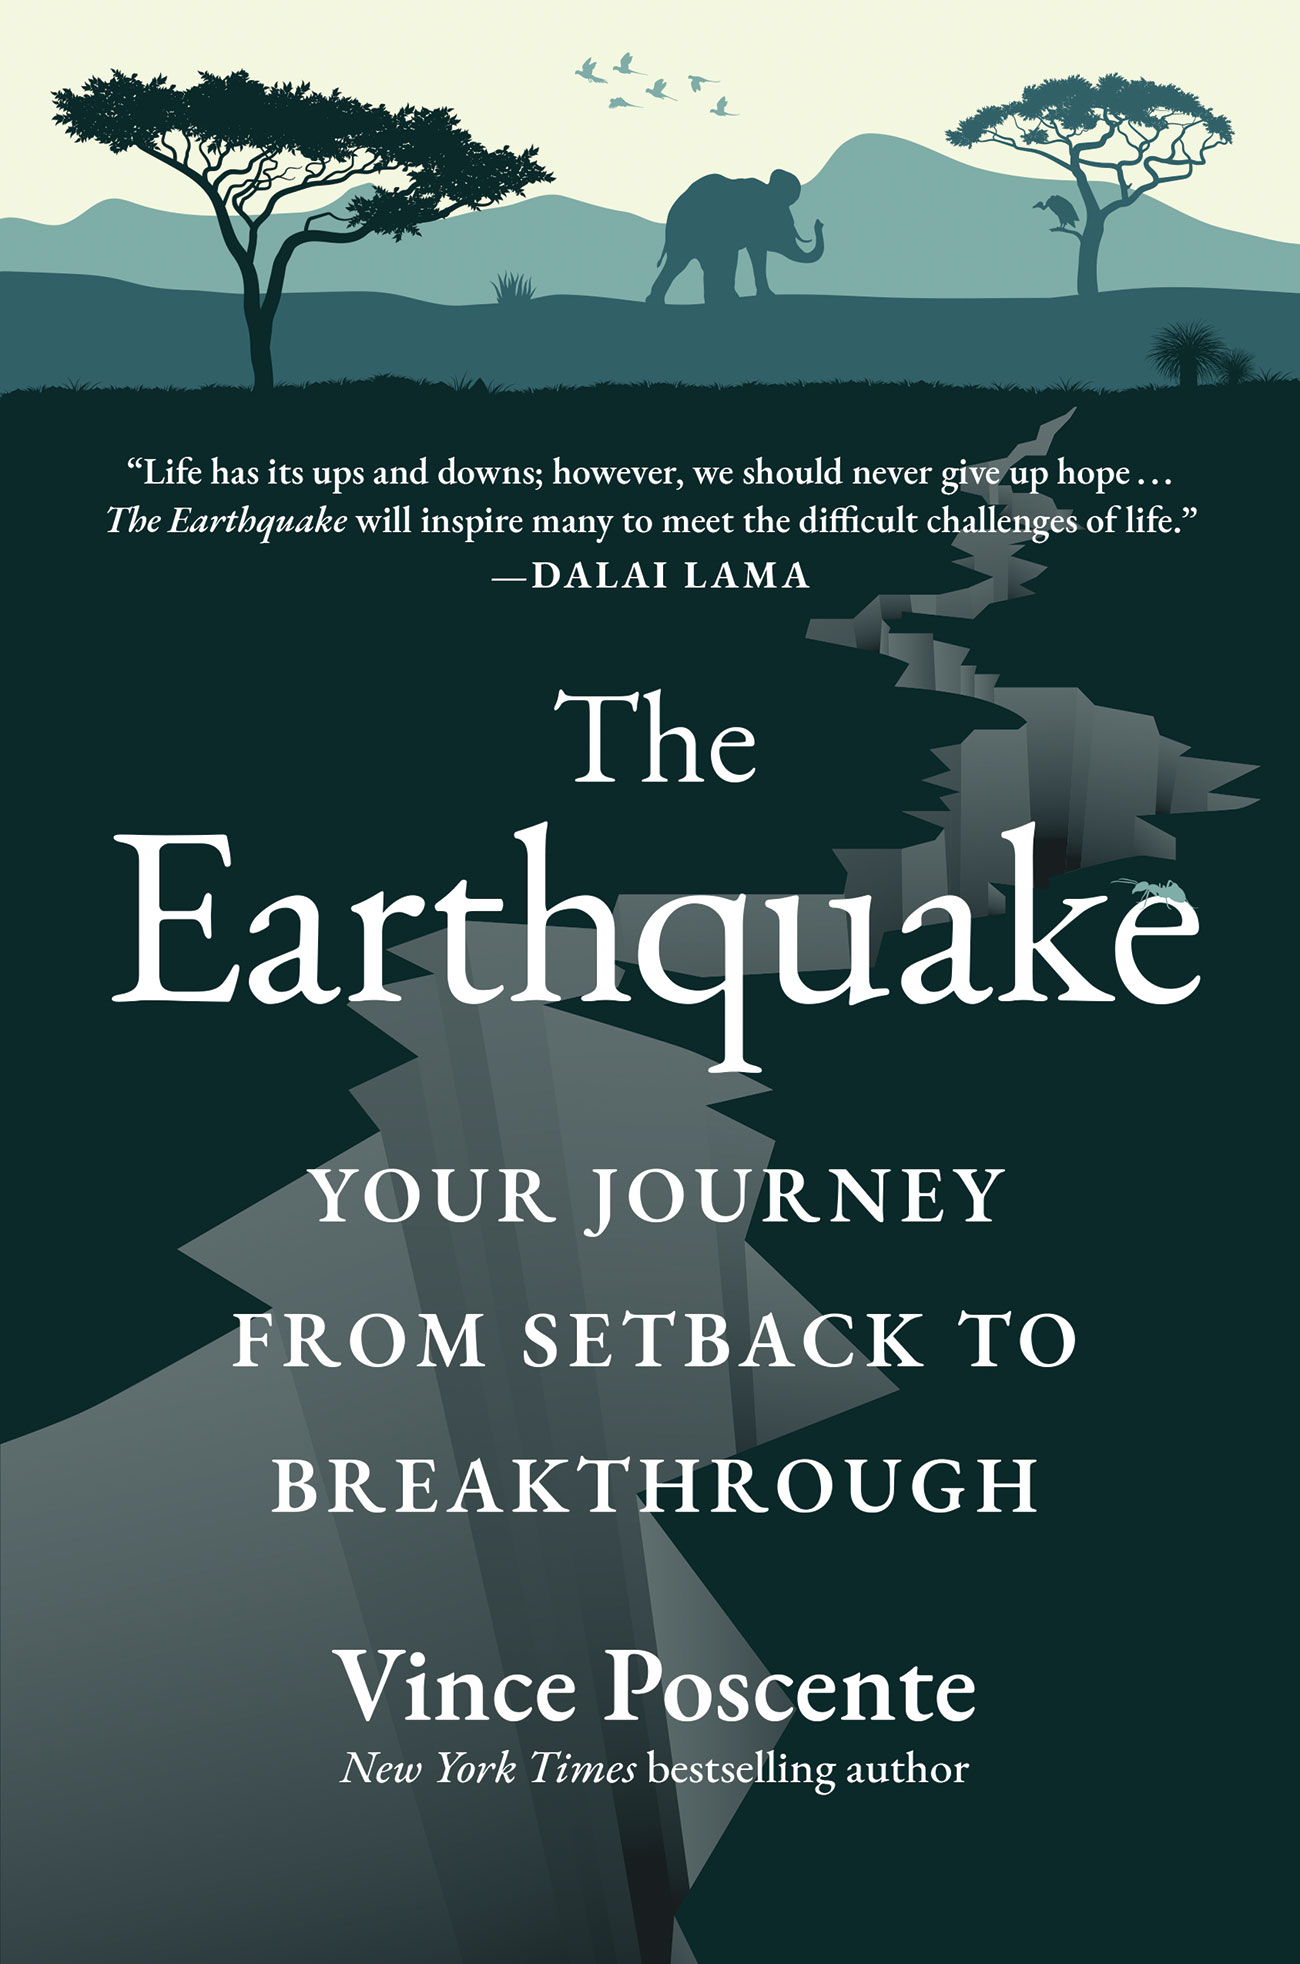 the earthquake final cover The Earthquake: Your Journey from Setback to Breakthrough